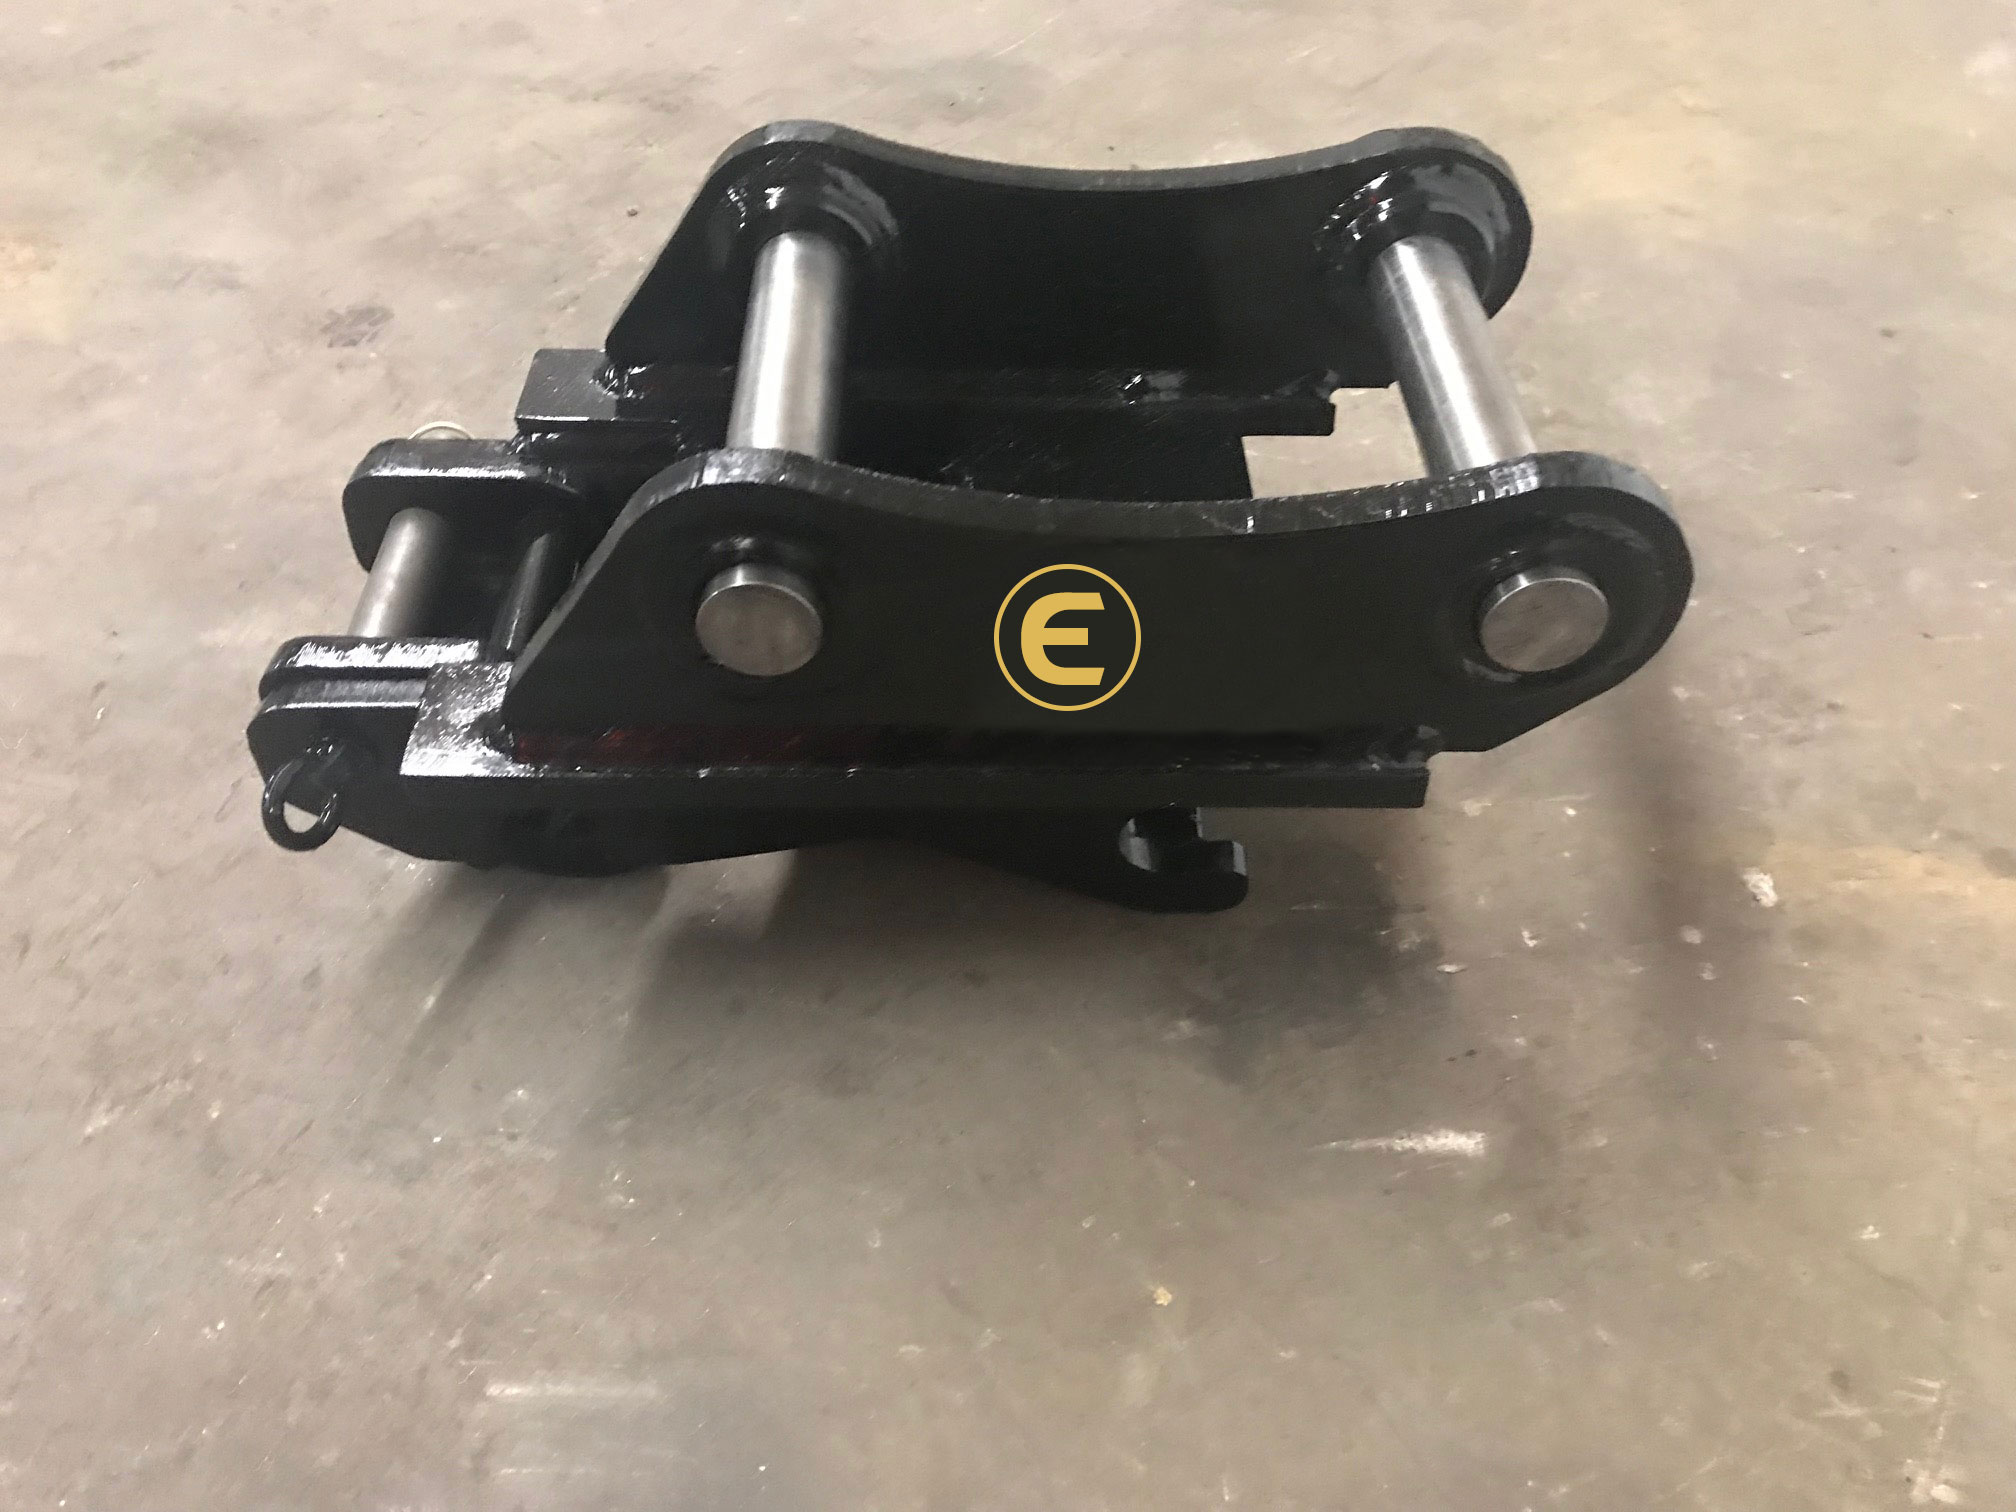 New 12" Excavator Bucket for a Takeuchi TB025 with Coupler Pins 